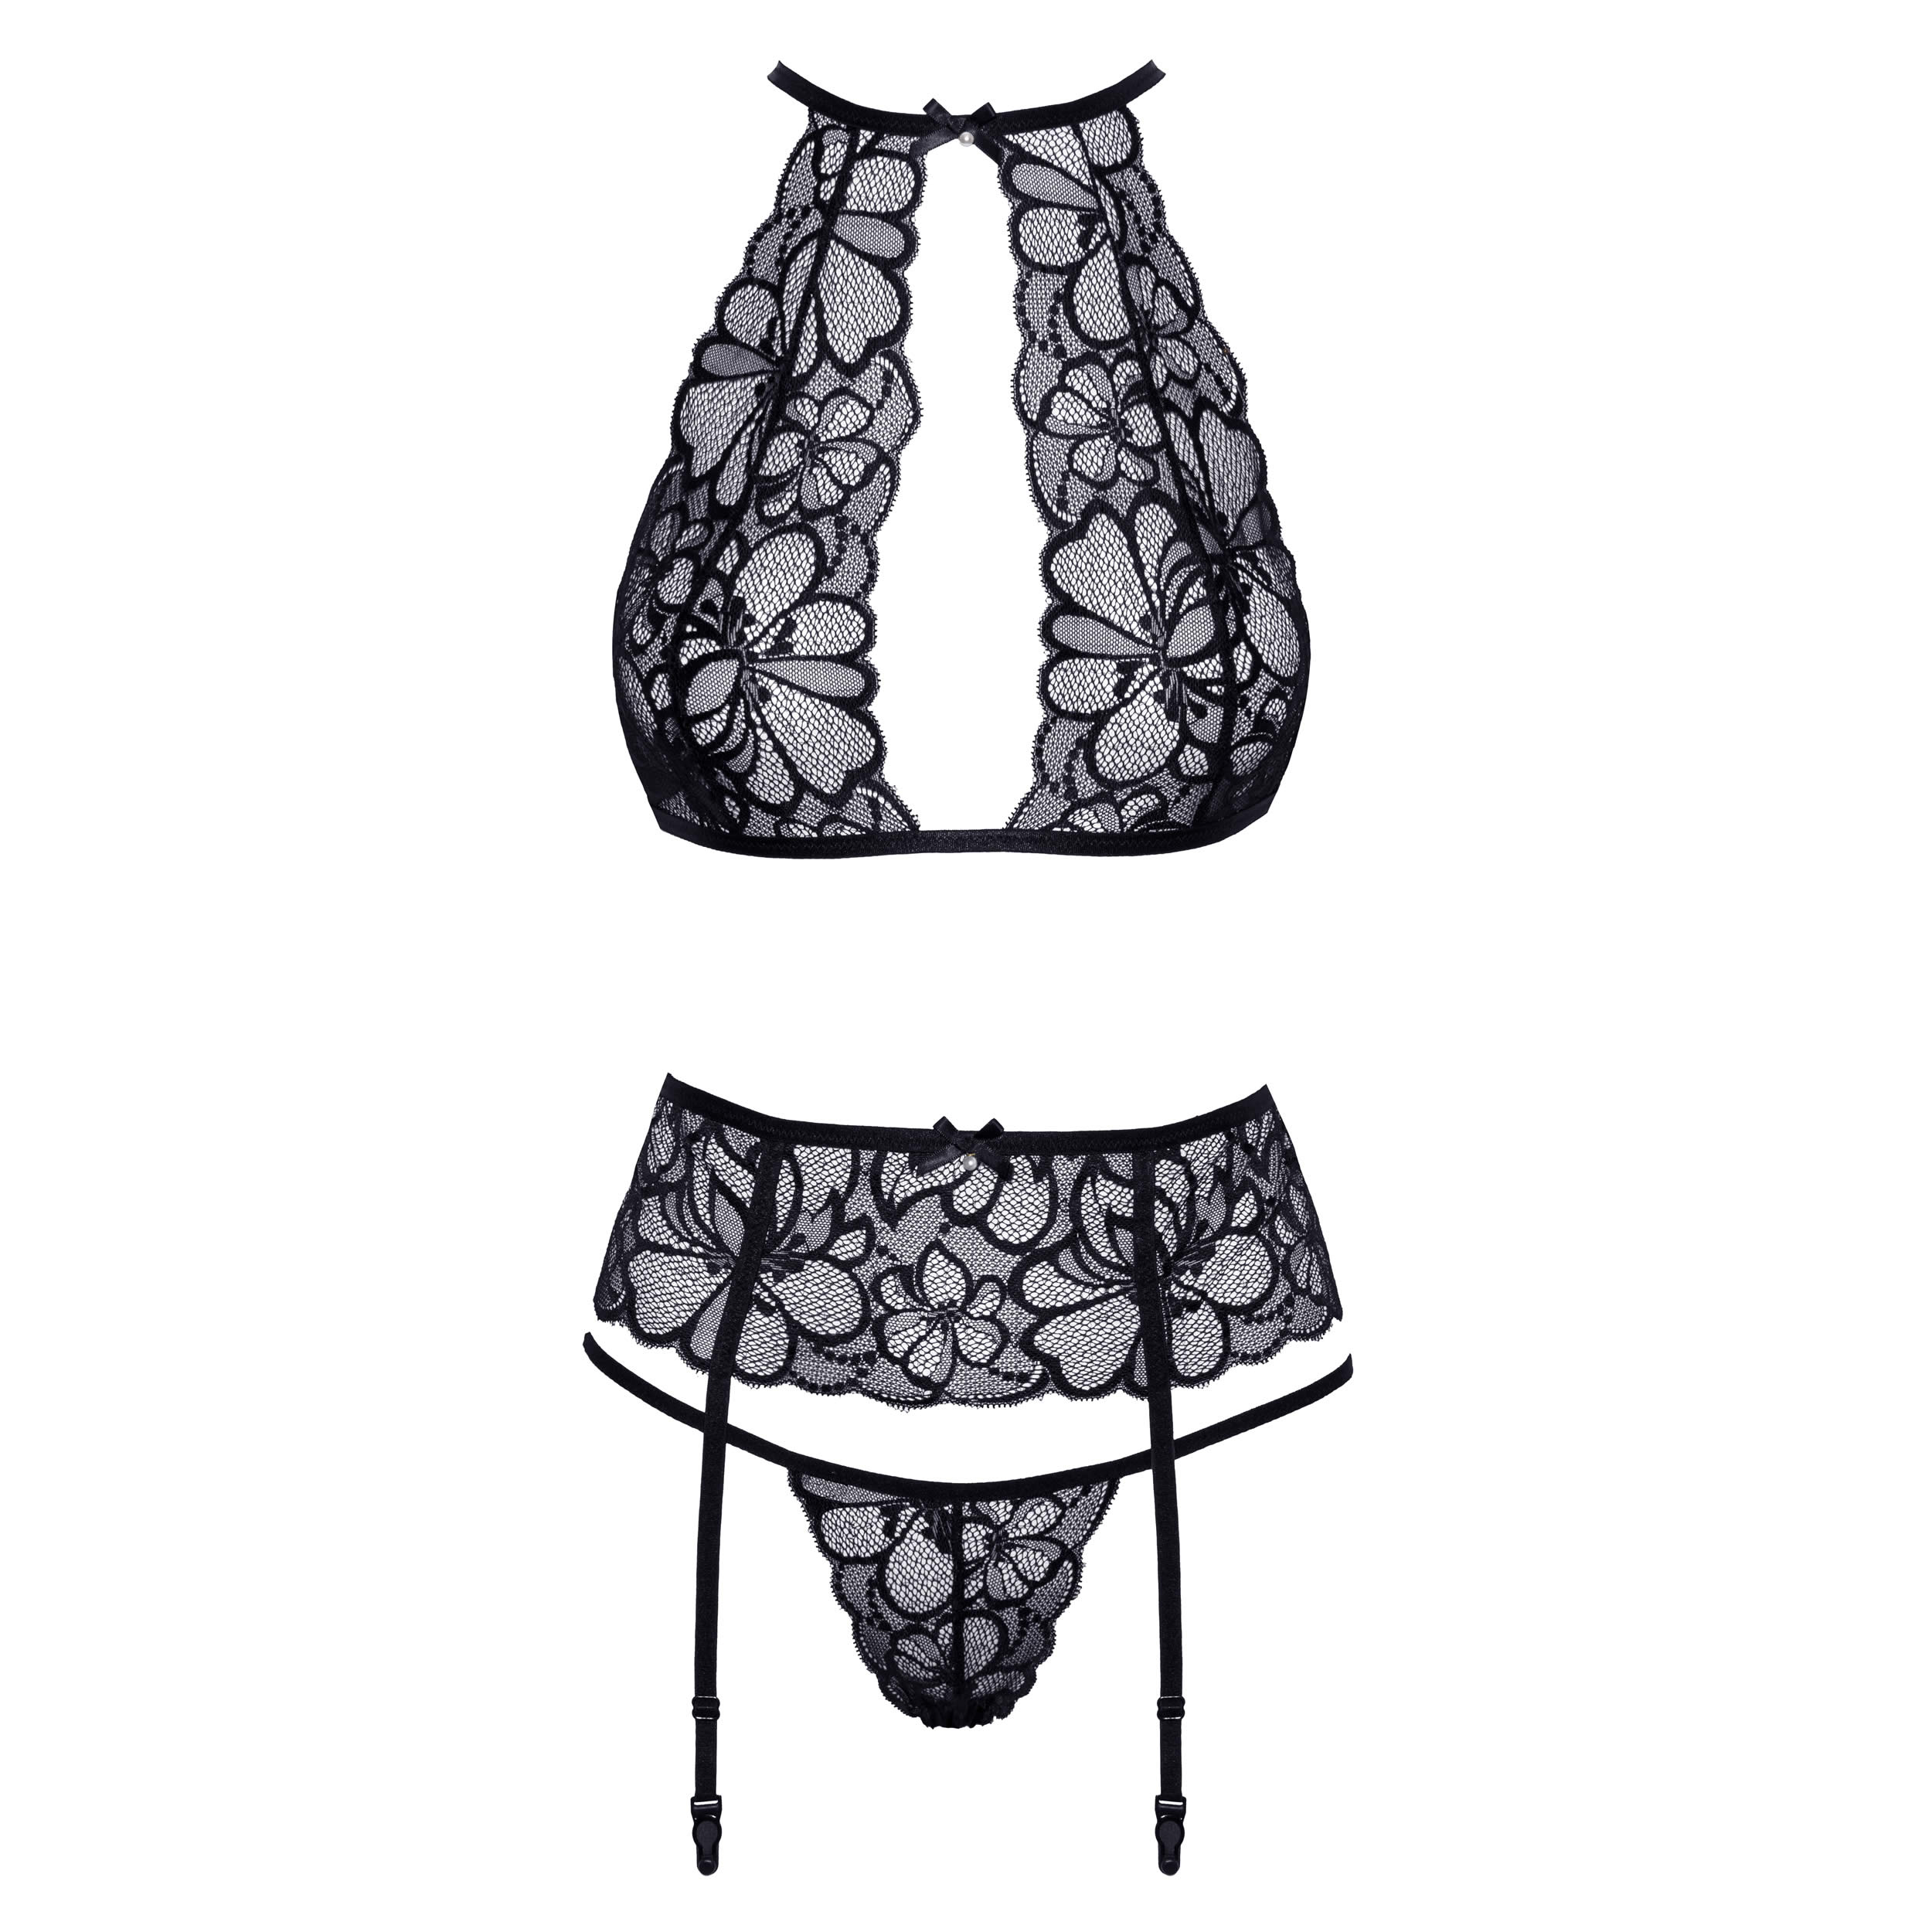 Kissable Lace Lingerie Set in Black with Suspenders